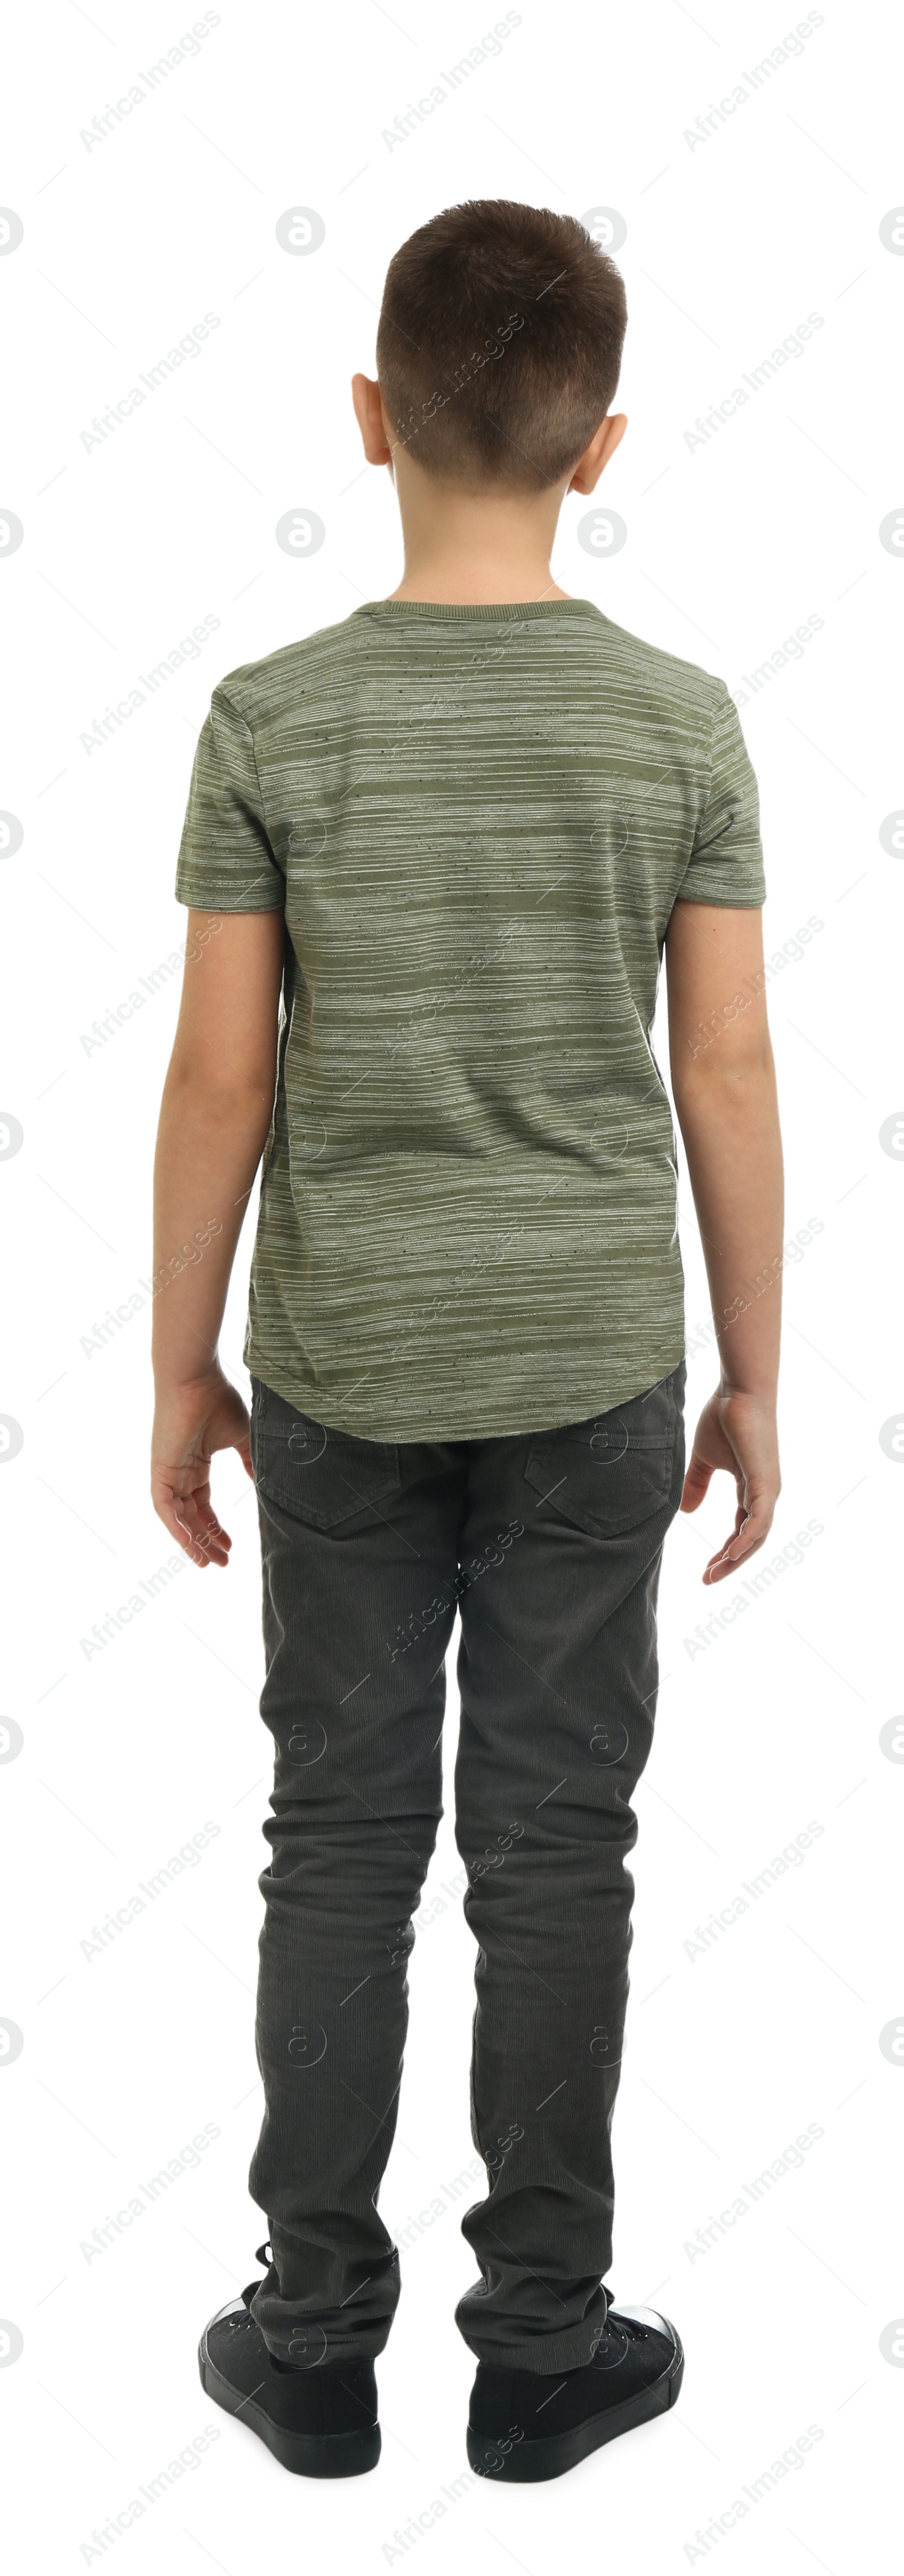 Photo of Preteen boy on white background, back view